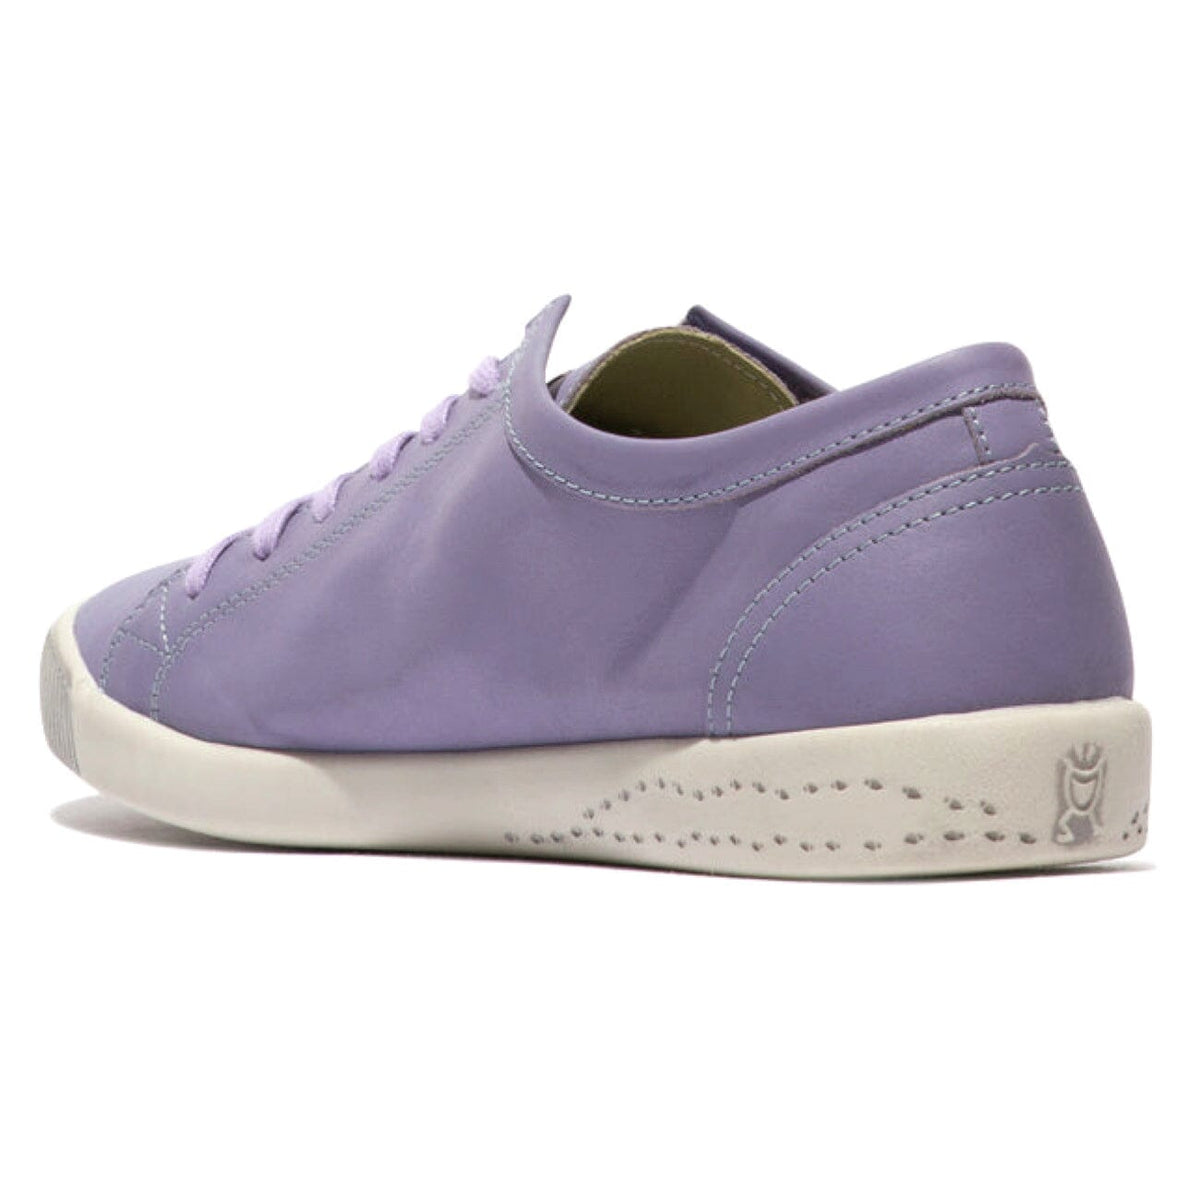 Softinos, Isla154, Laceup Shoe, Smooth Leather, Violet Shoes Softinos 